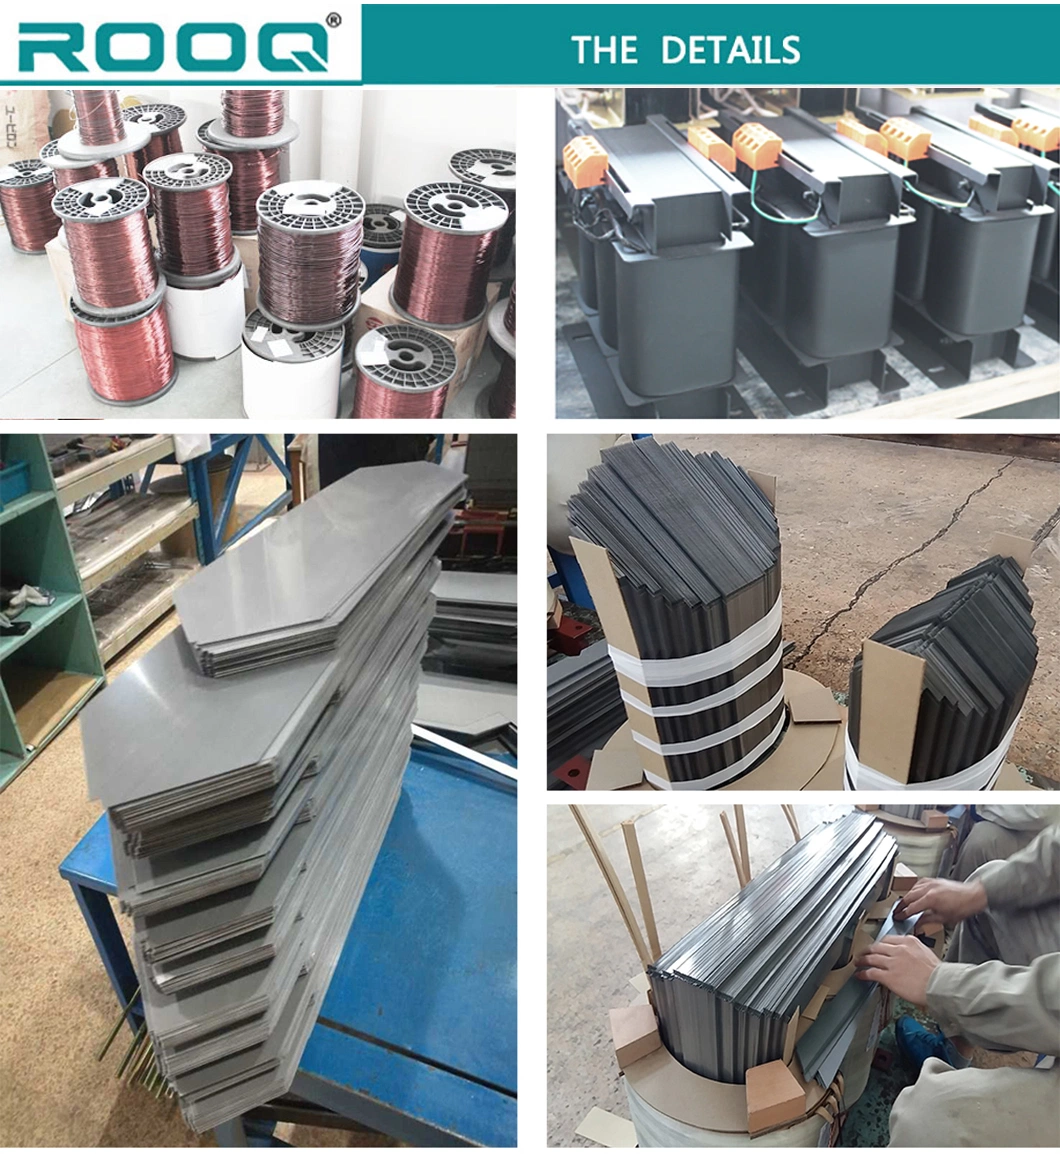 4kVA Three-Phase Dry Type Low-Voltage Isolated Transformer